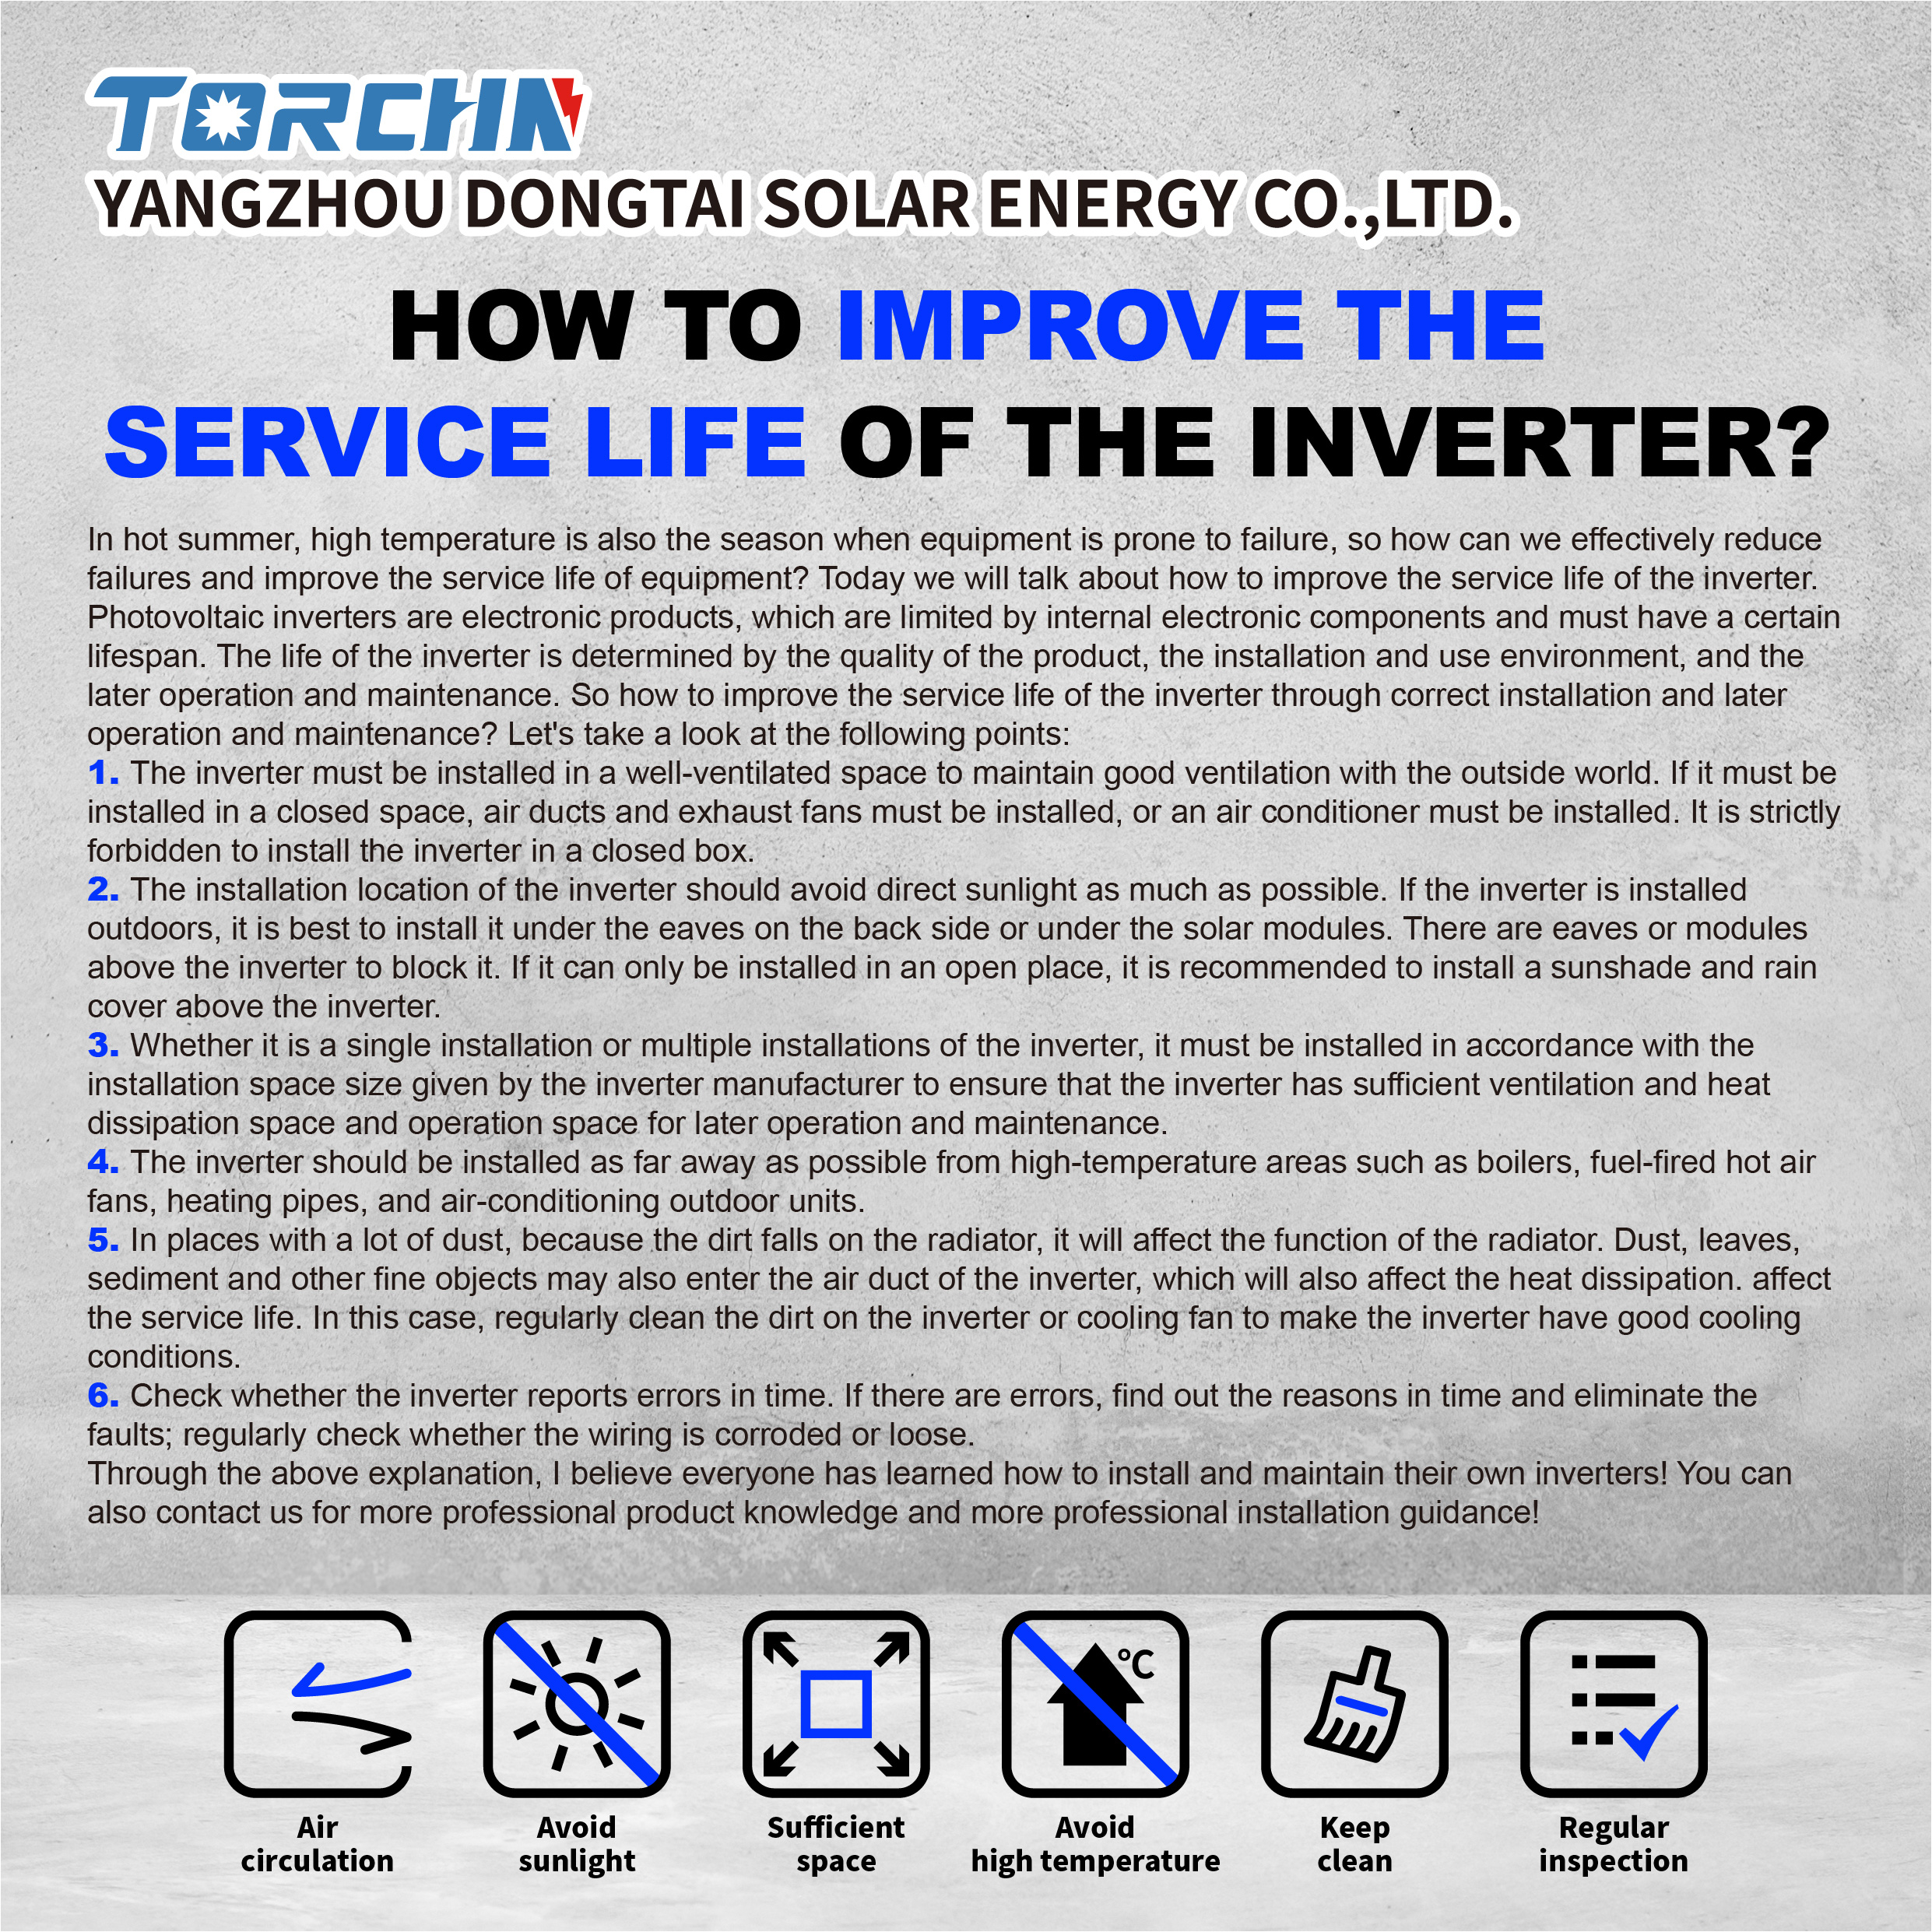 How to improve the service life of the inverter?